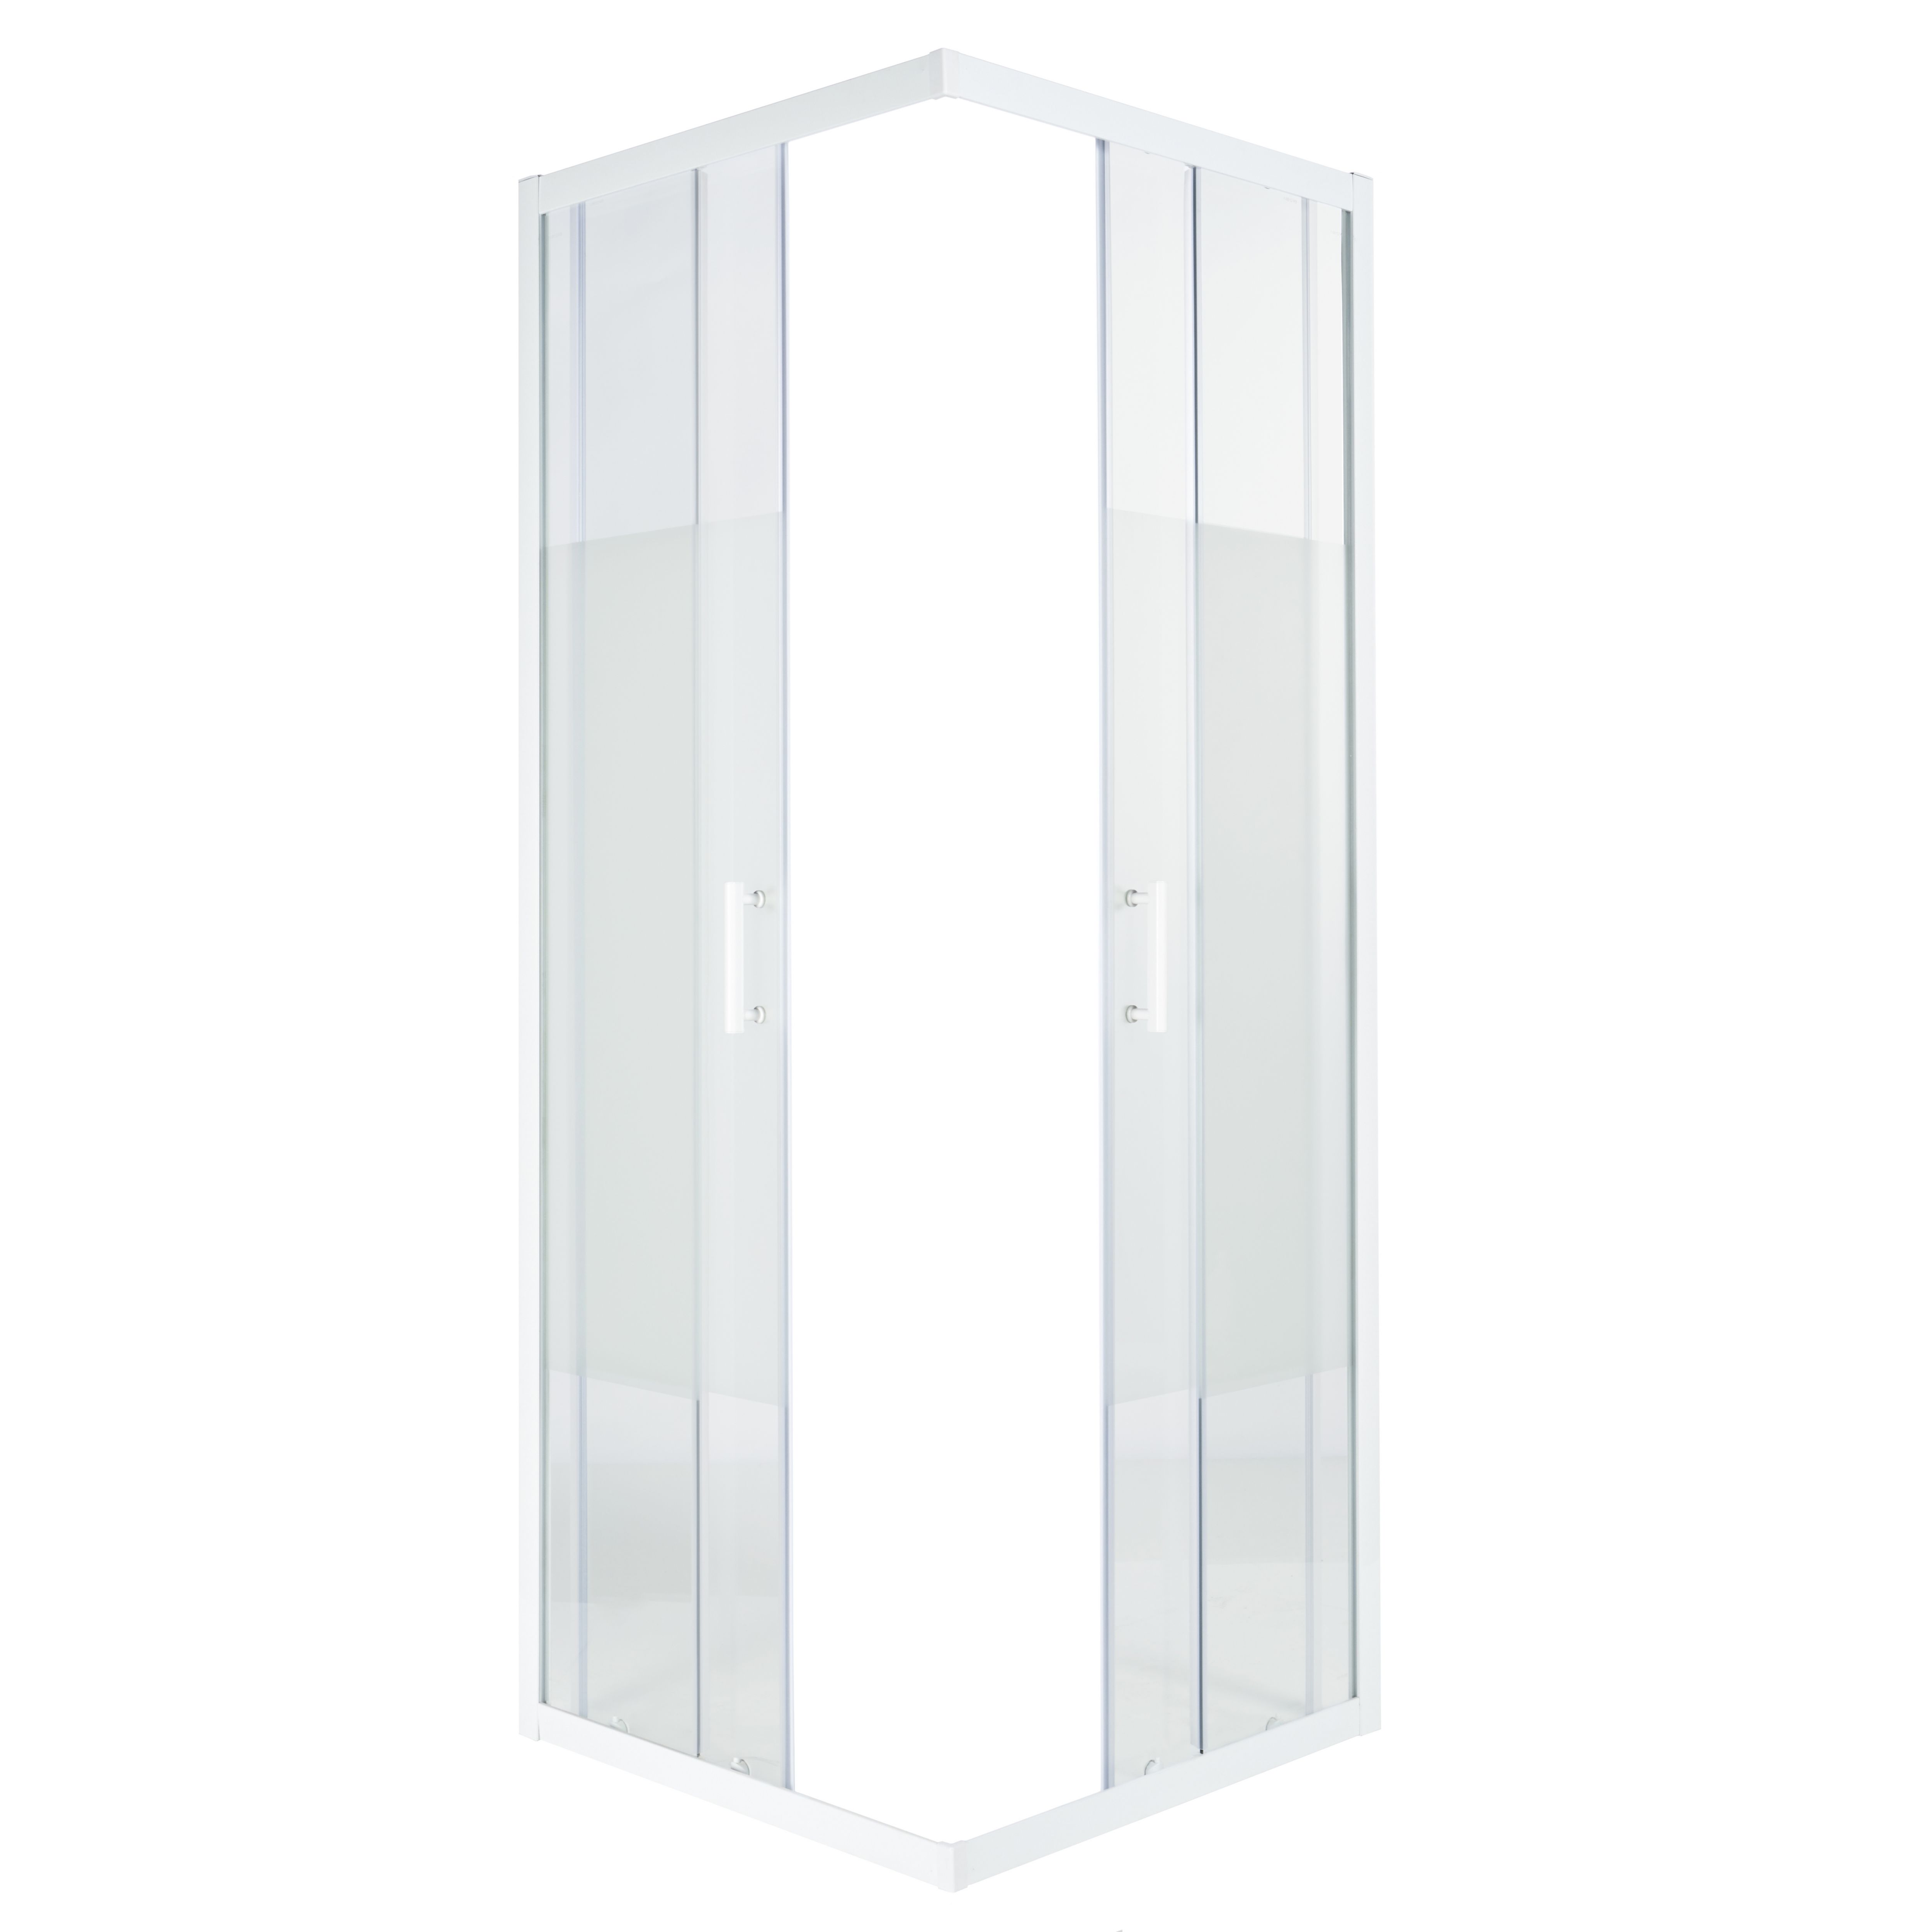 GoodHome Onega White Square Shower Enclosure & tray with Corner entry double sliding door (H)190cm (W)76cm (D)76cm